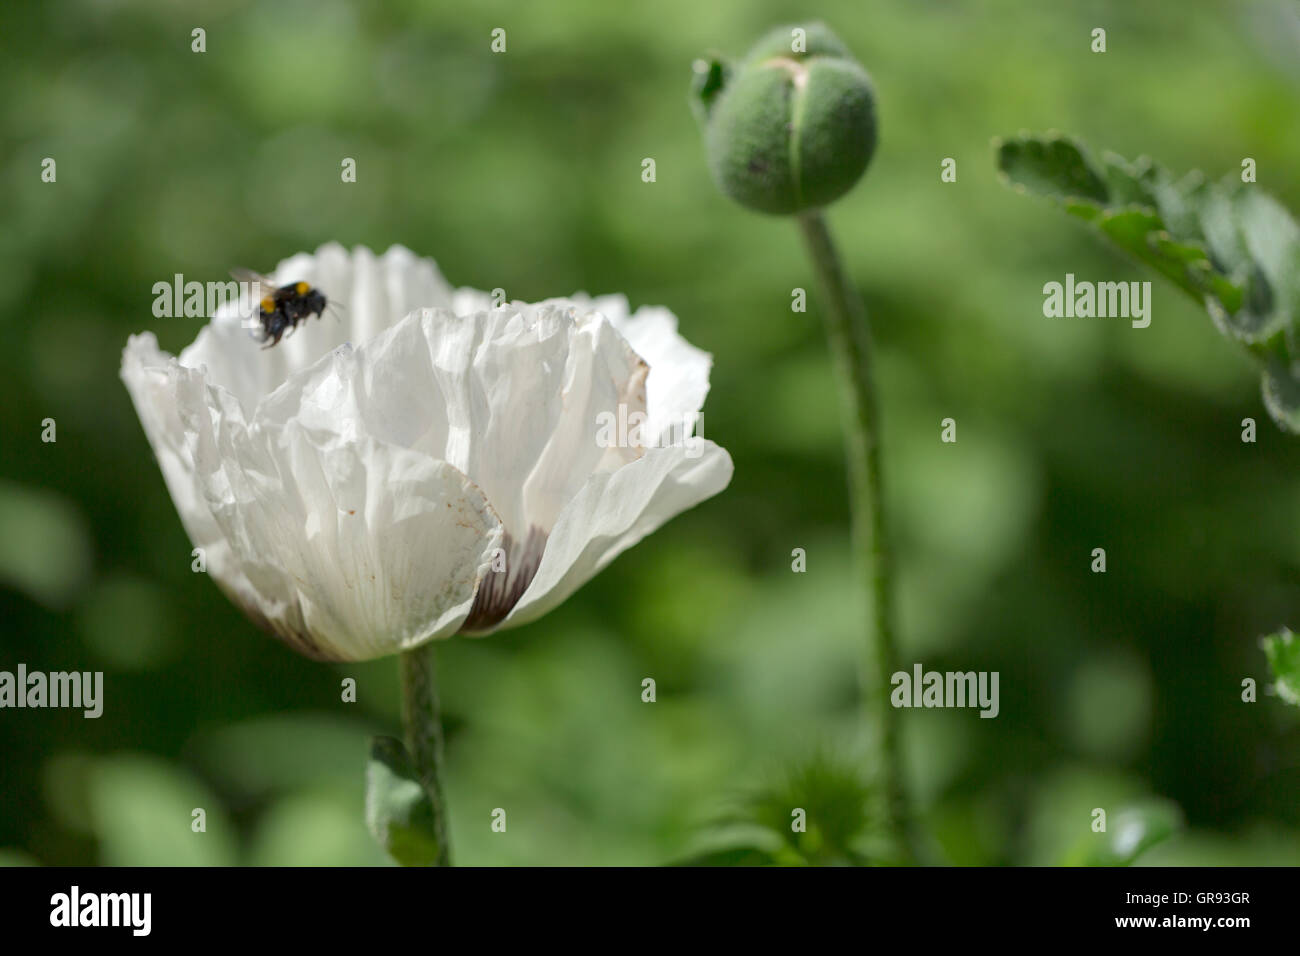 A White Poppy And Bud With Green Background Of Approaching Bumblebee Stock Photo